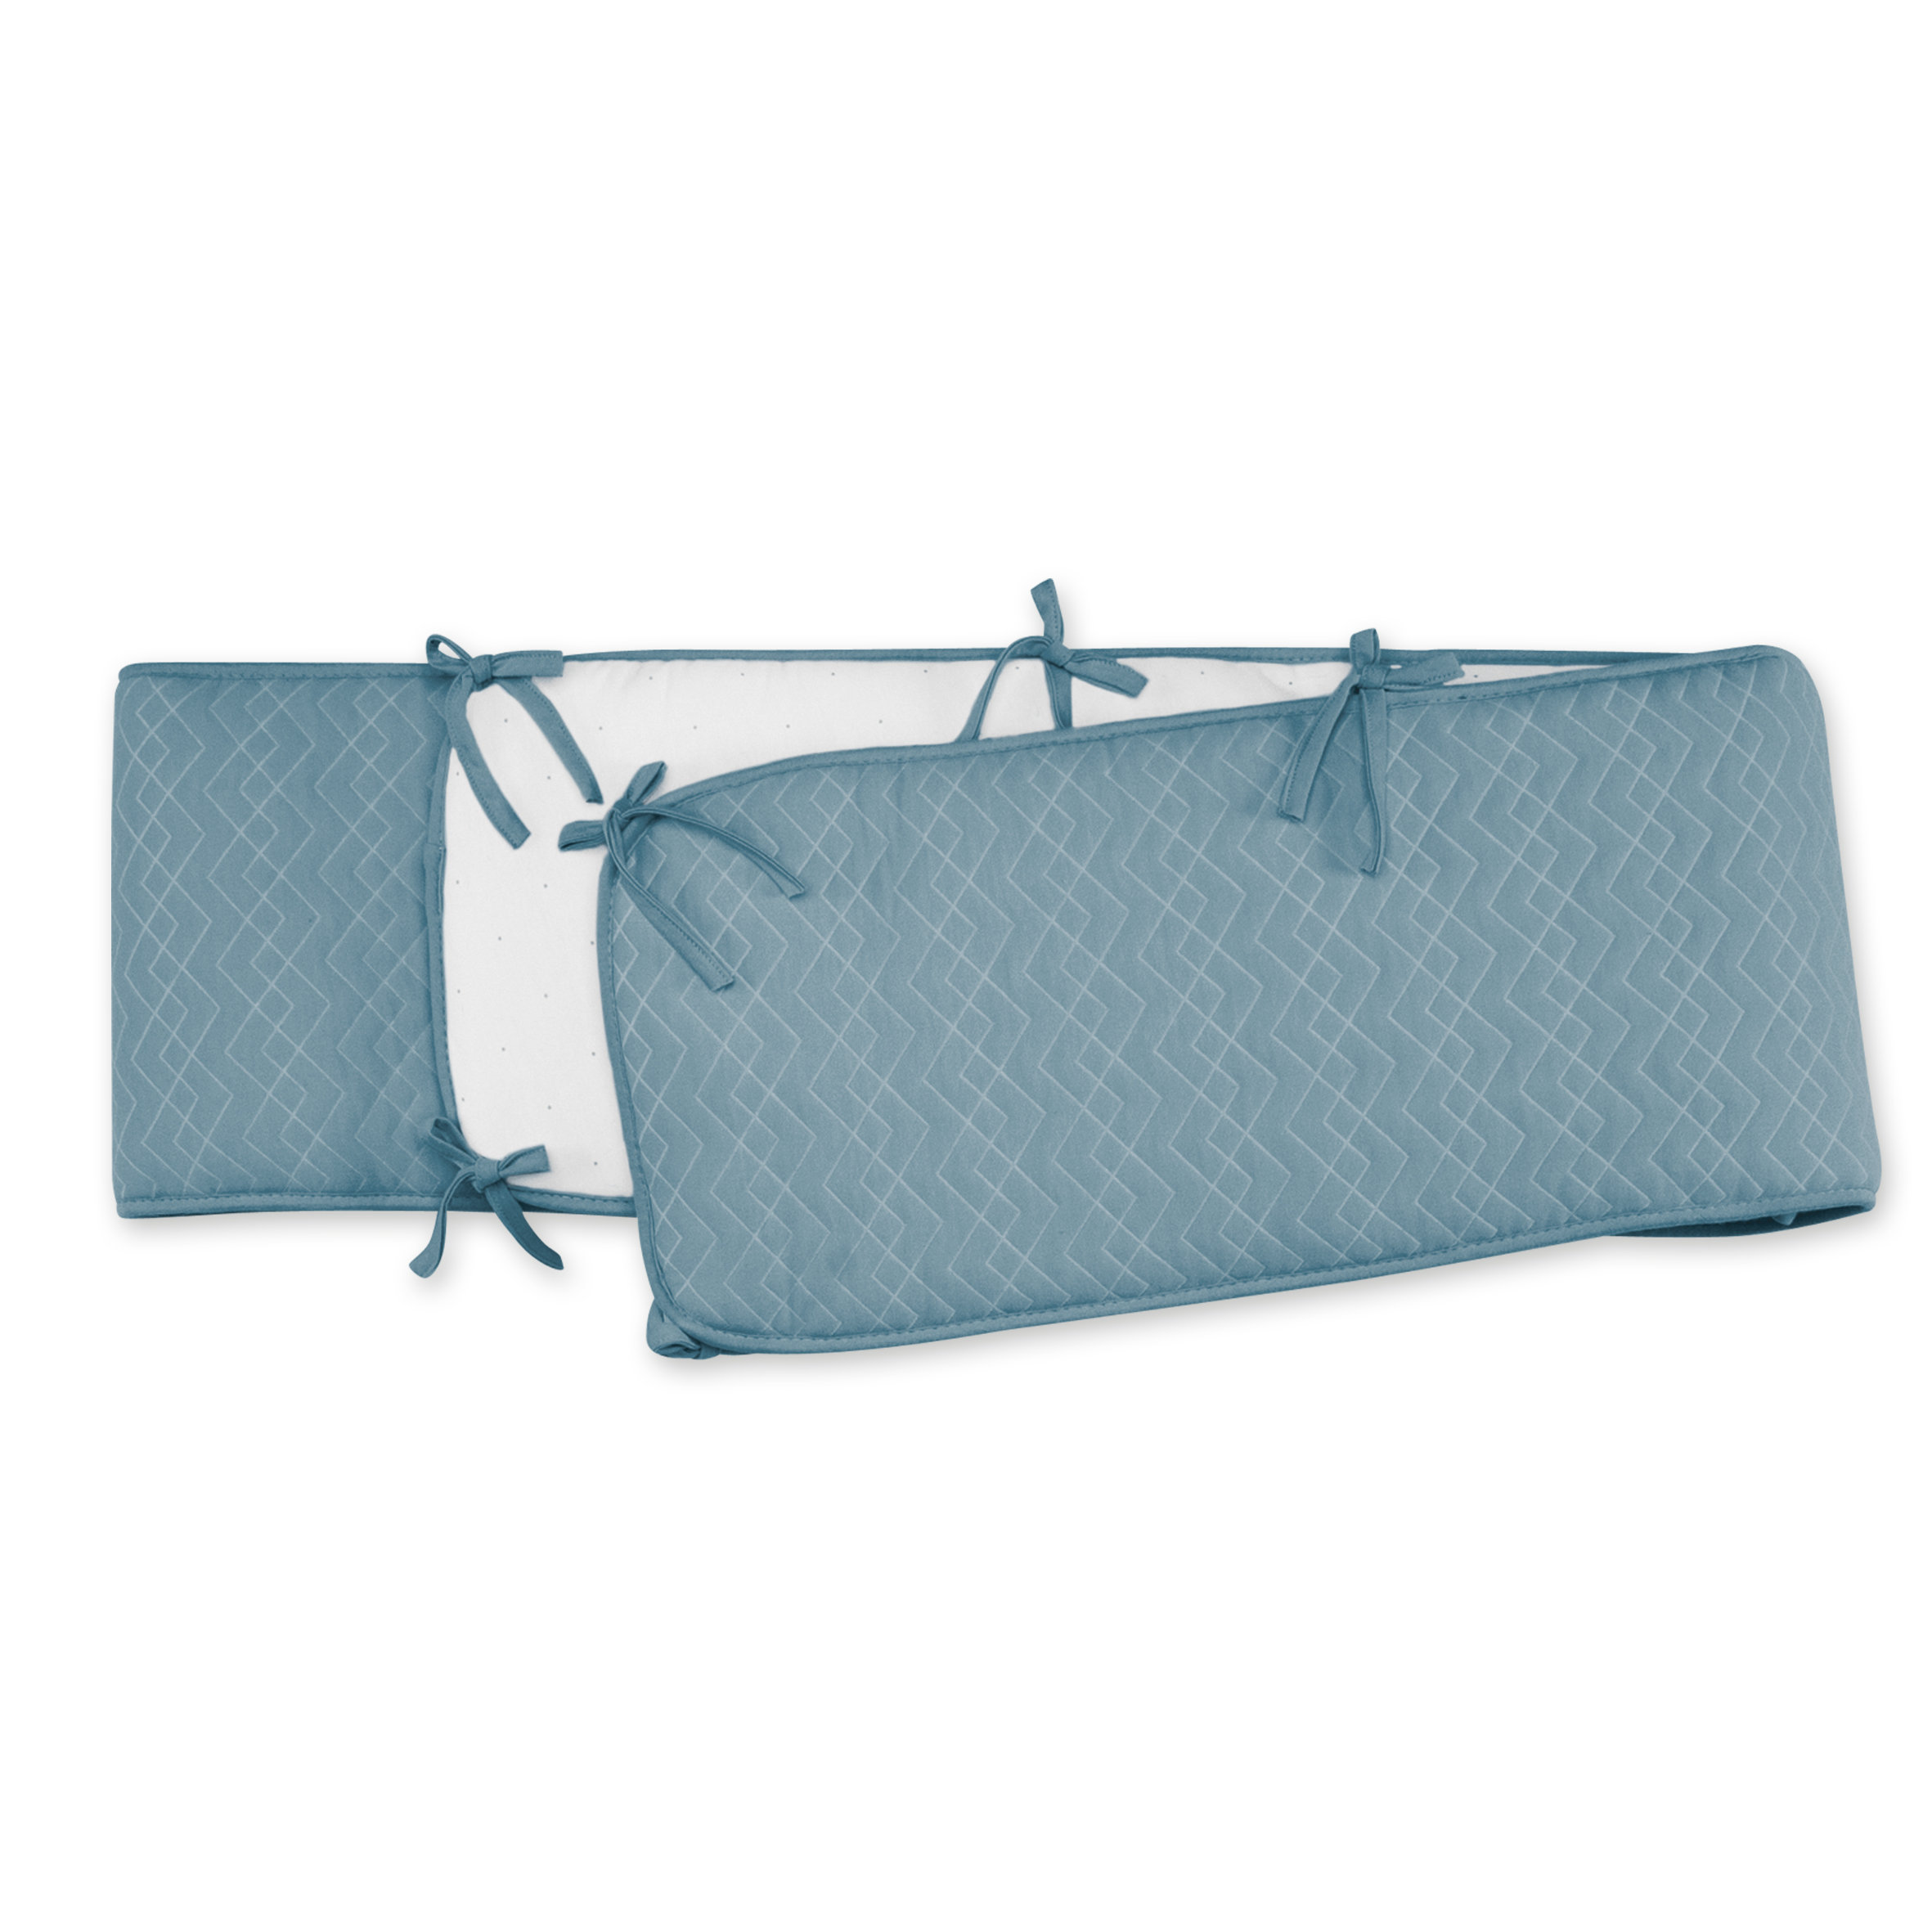 Protector de parque Pady quilted jersey + jersey 75x95x28cm OSAKA Azul mineral